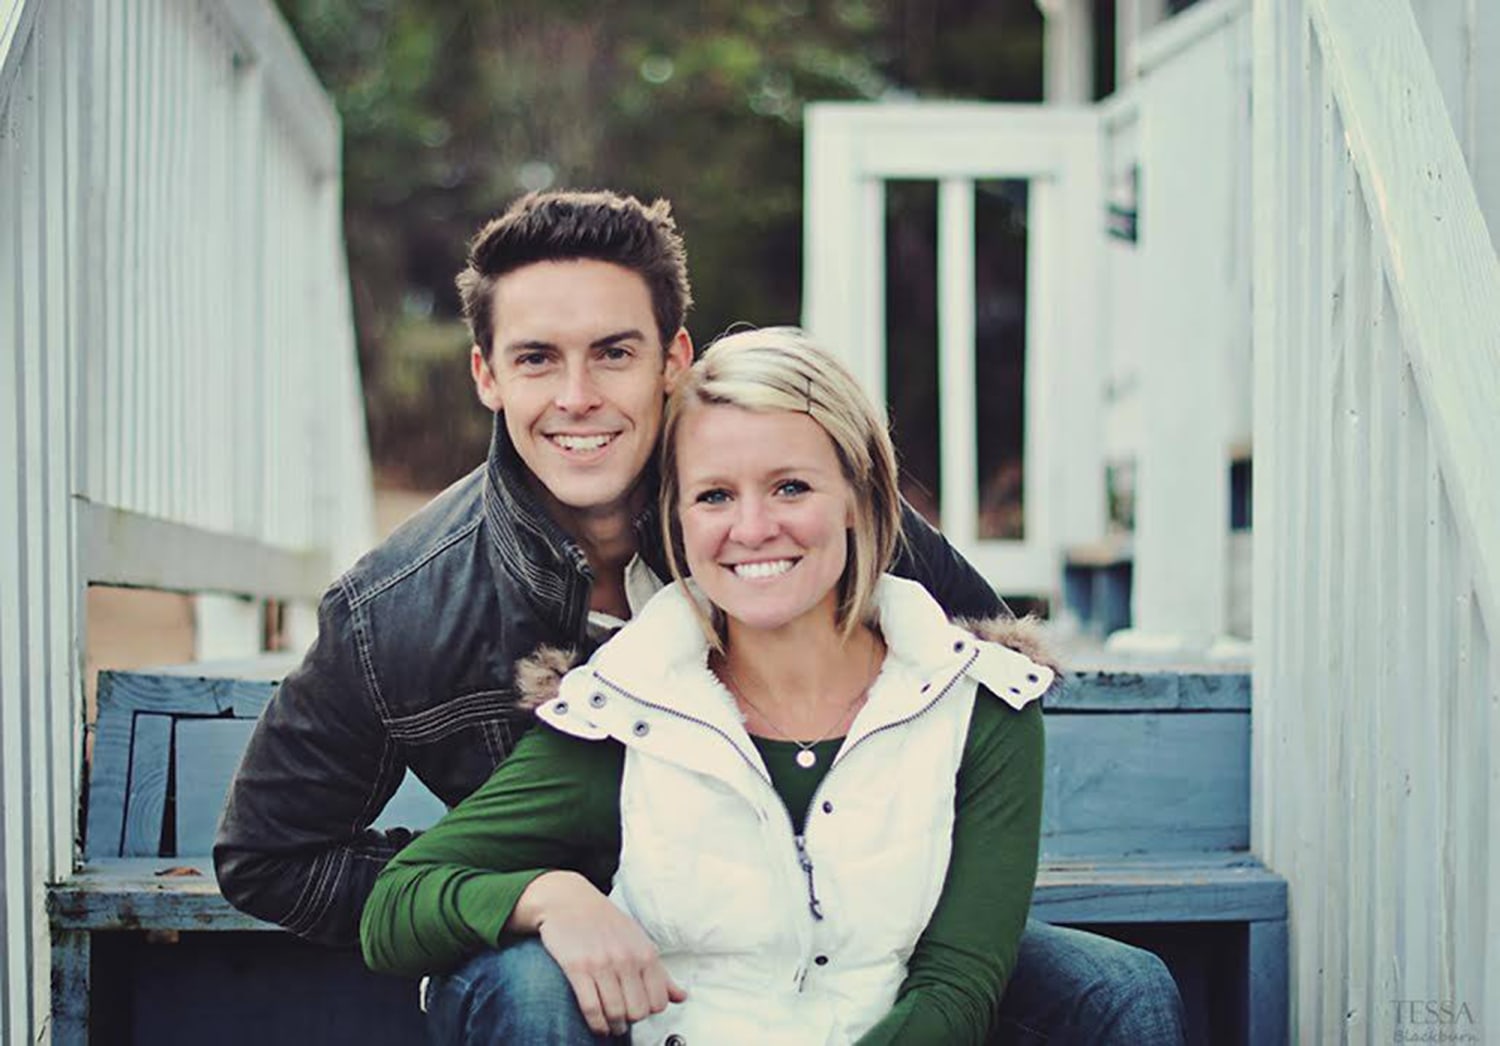 Two Charged With Murdering Pastors Wife Amanda Blackburn photo